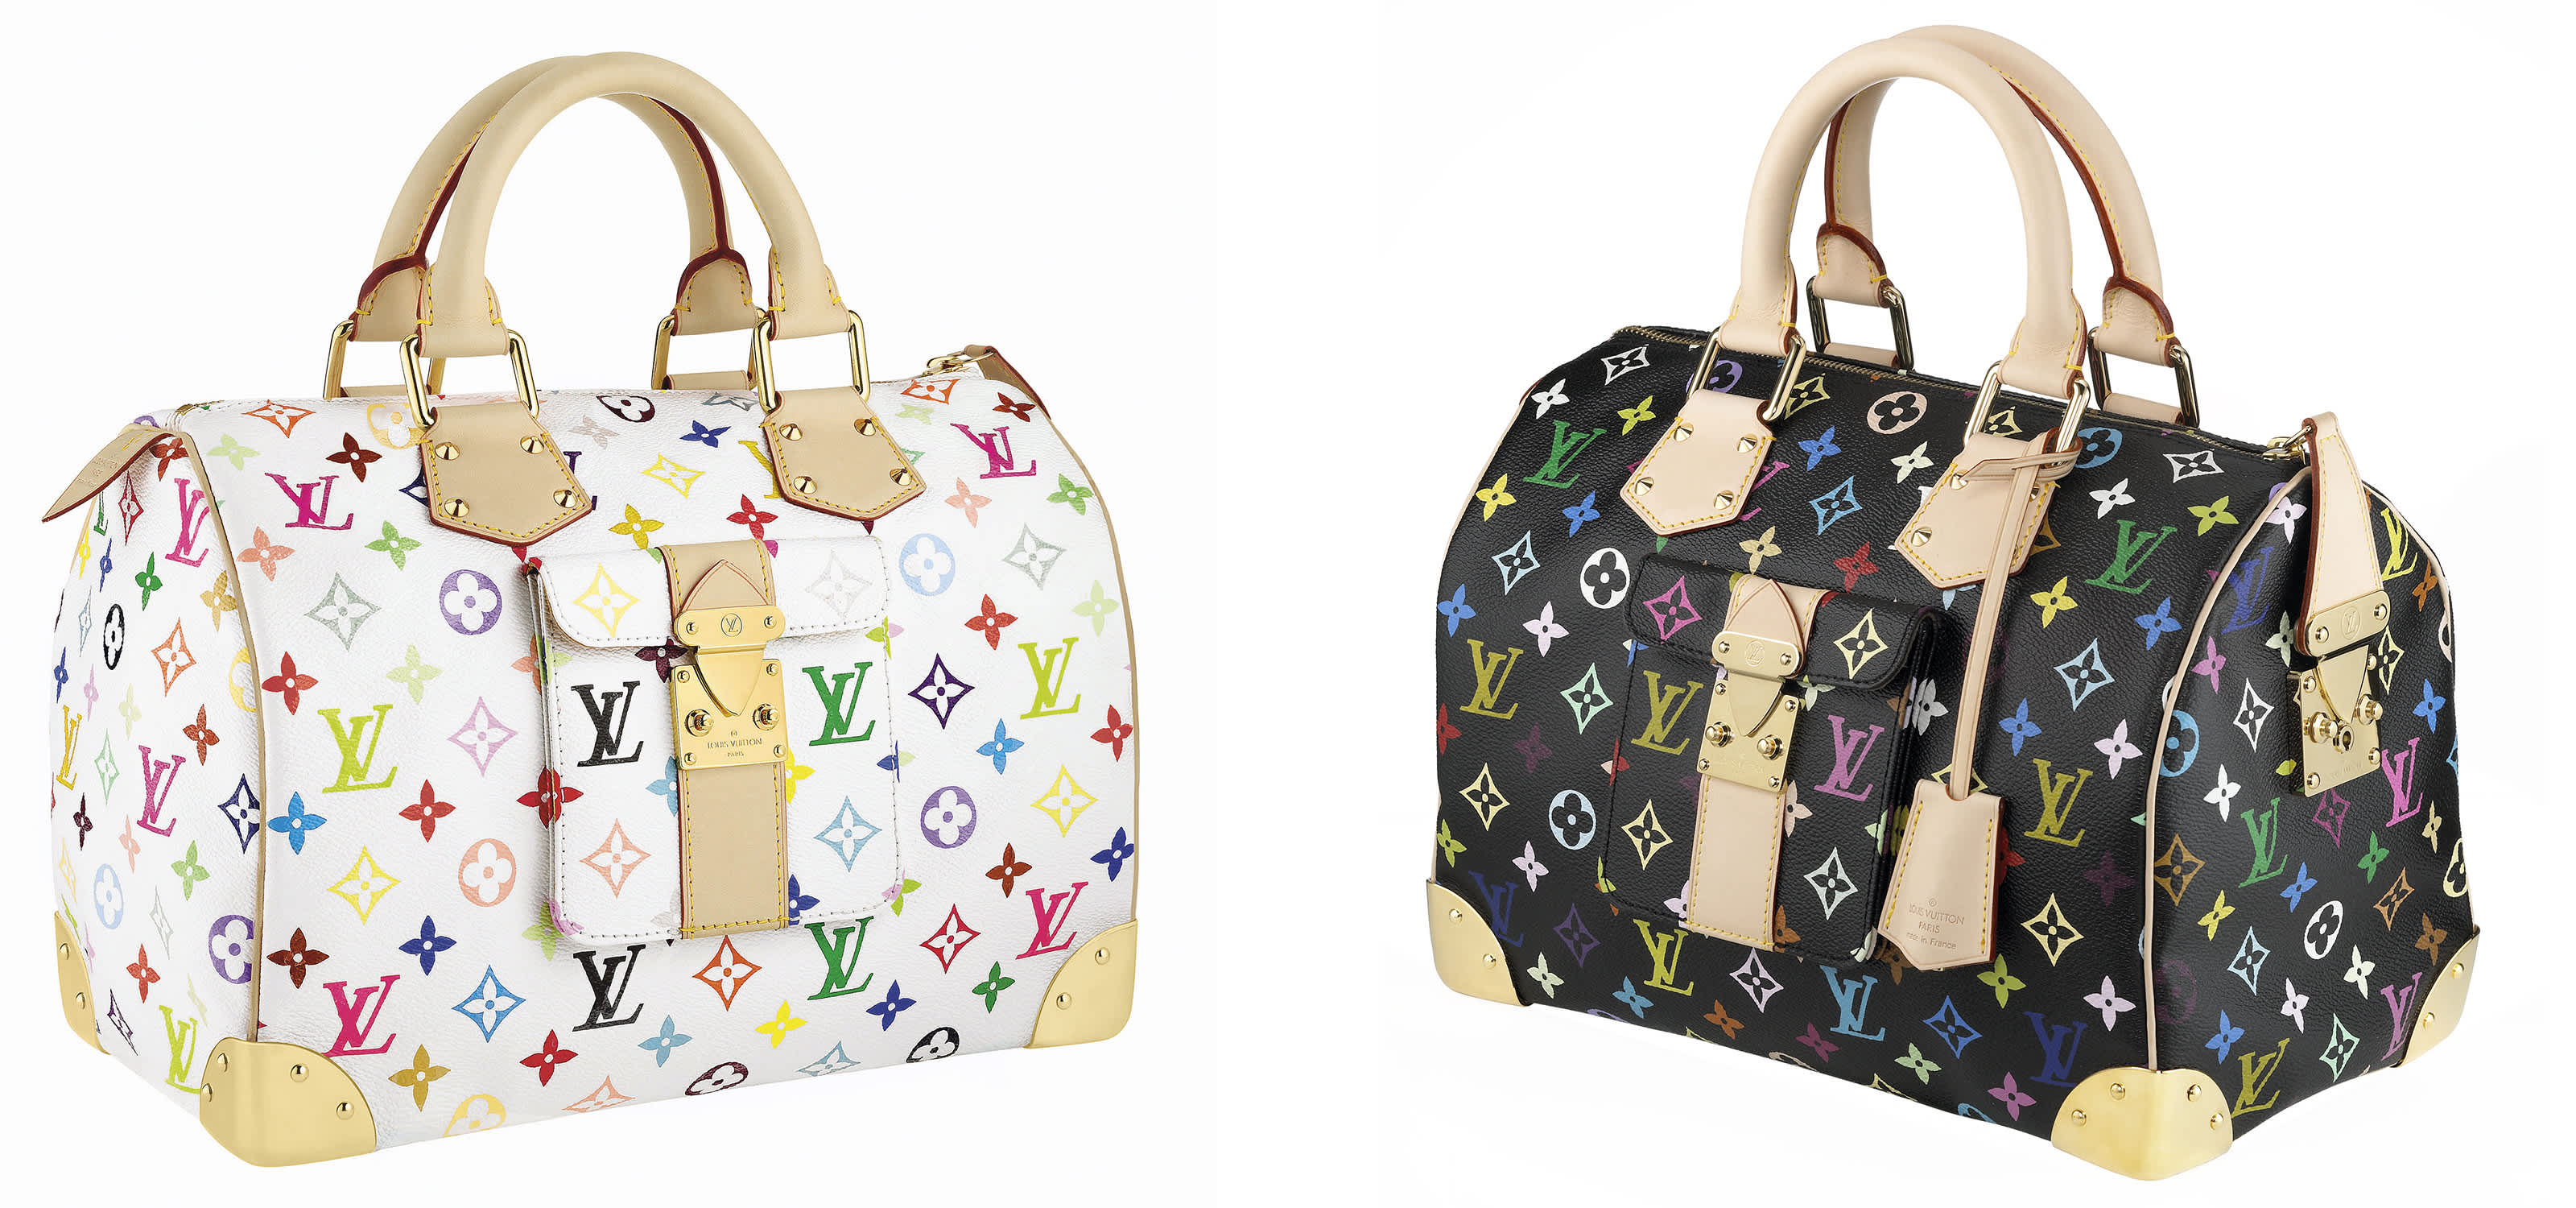 Bags from the 'Multicolor Monogram' collection - Takashi Murakami for Louis Vuitton. Courtesy of Louis Vuitton.